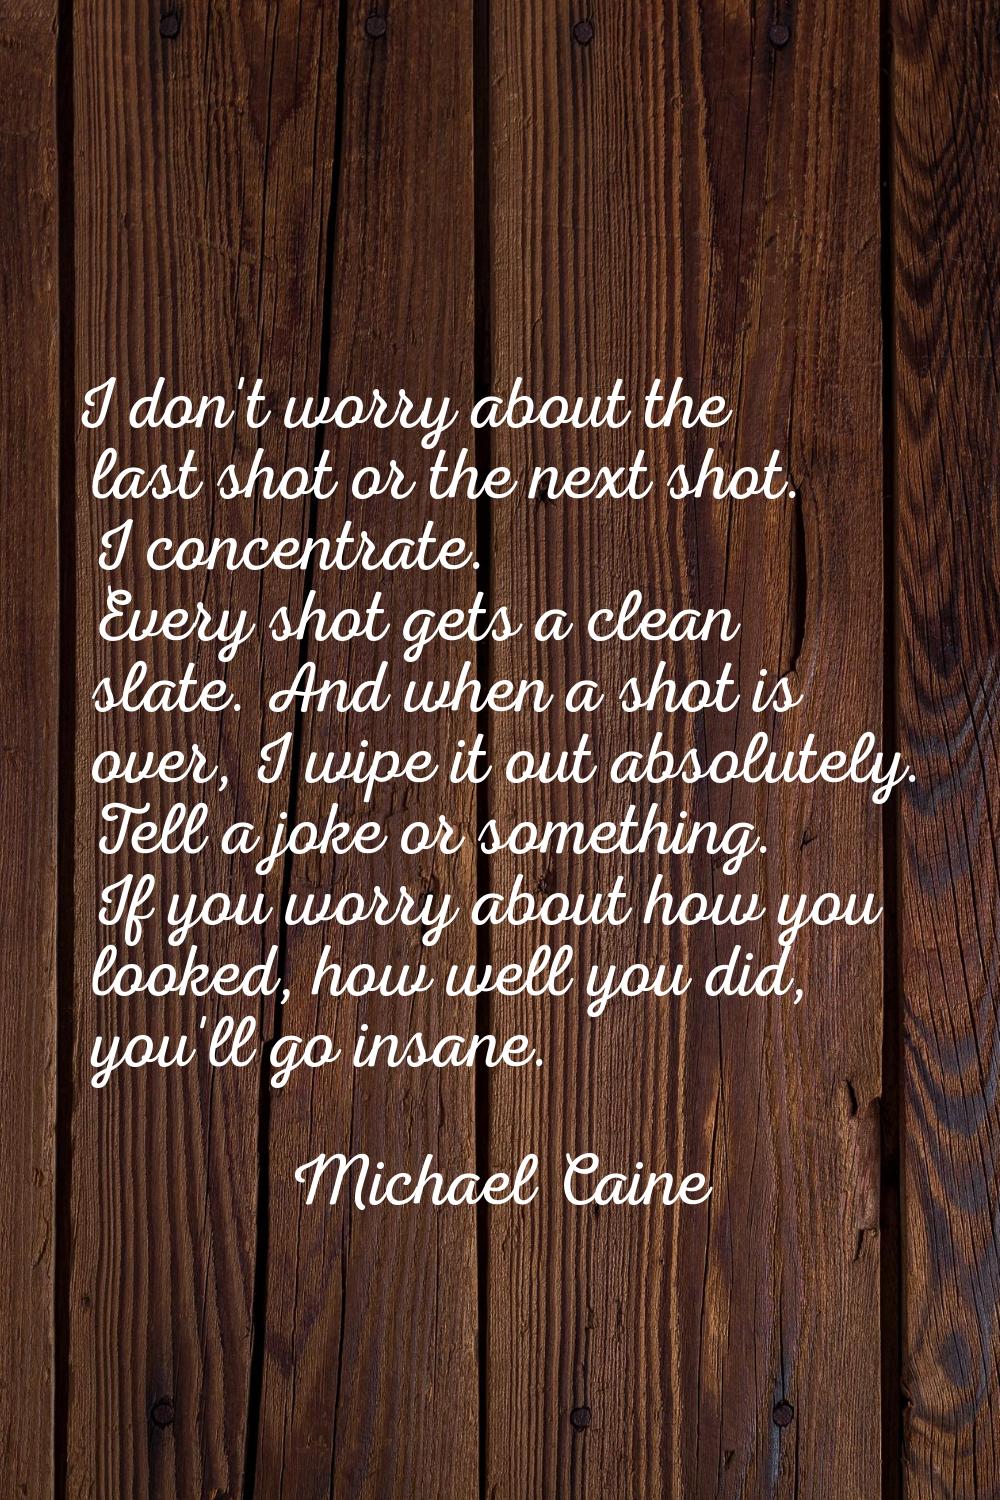 I don't worry about the last shot or the next shot. I concentrate. Every shot gets a clean slate. A